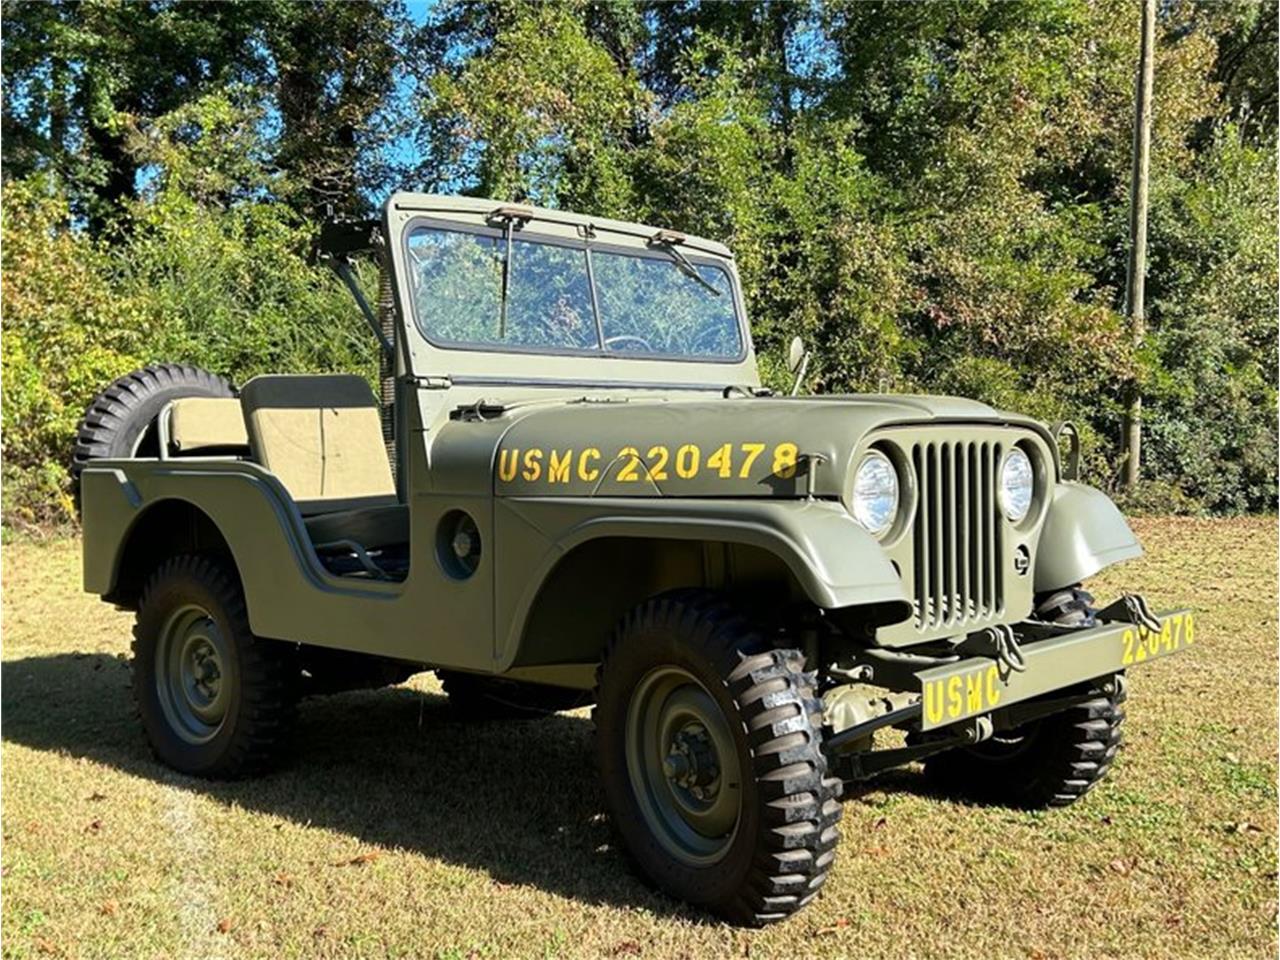 For Sale at Auction: 1955 Jeep Willys in Greensboro, North Carolina for sale in Greensboro, NC